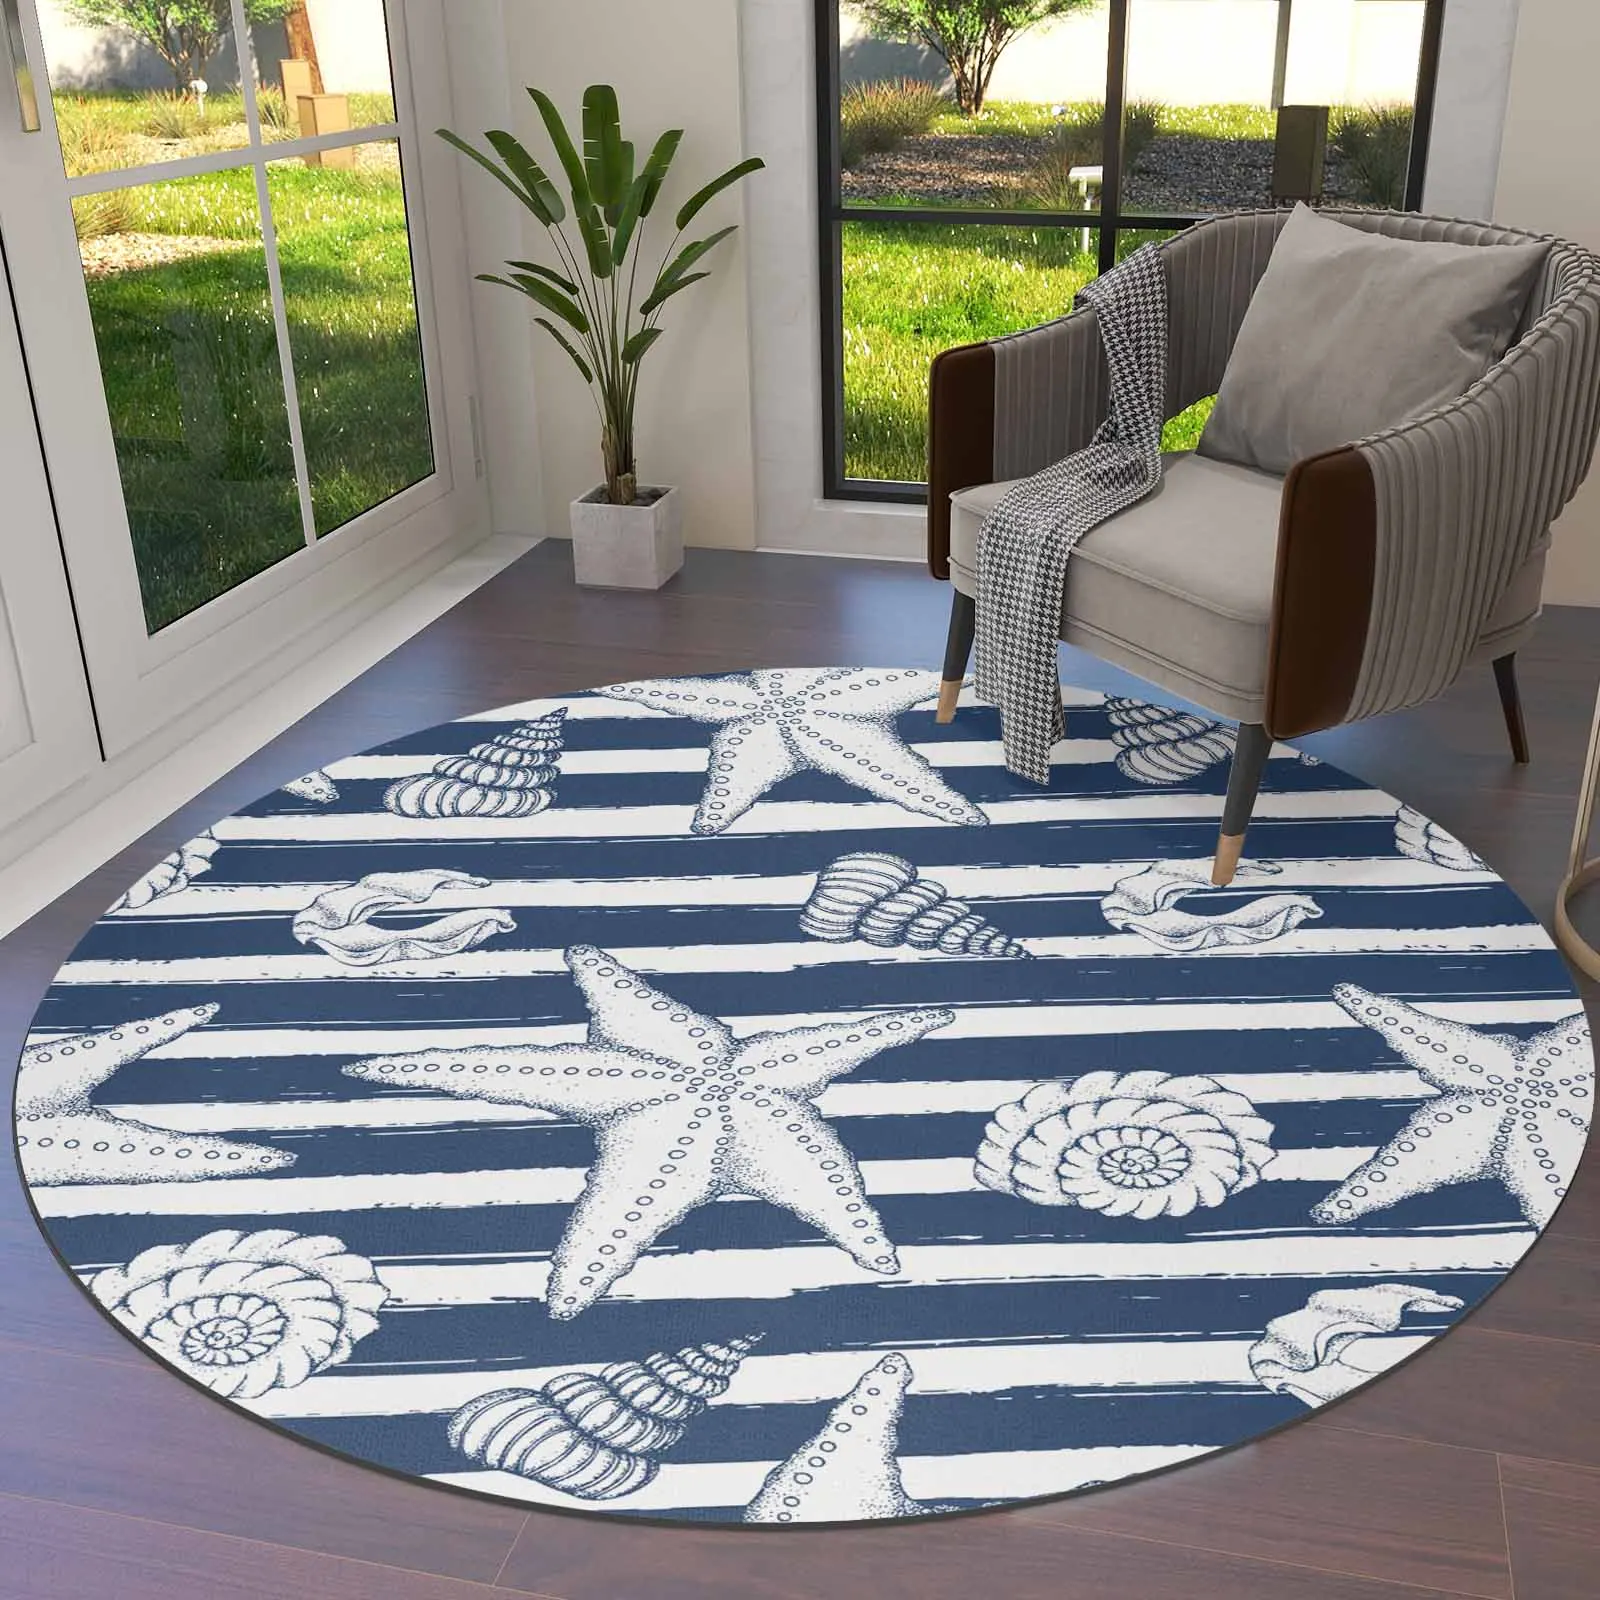 

Striped Conch Lines In The Natural Ocean Round Area Rug Carpets For Living Room Large Mat Home Bedroom Kid Room Decoration